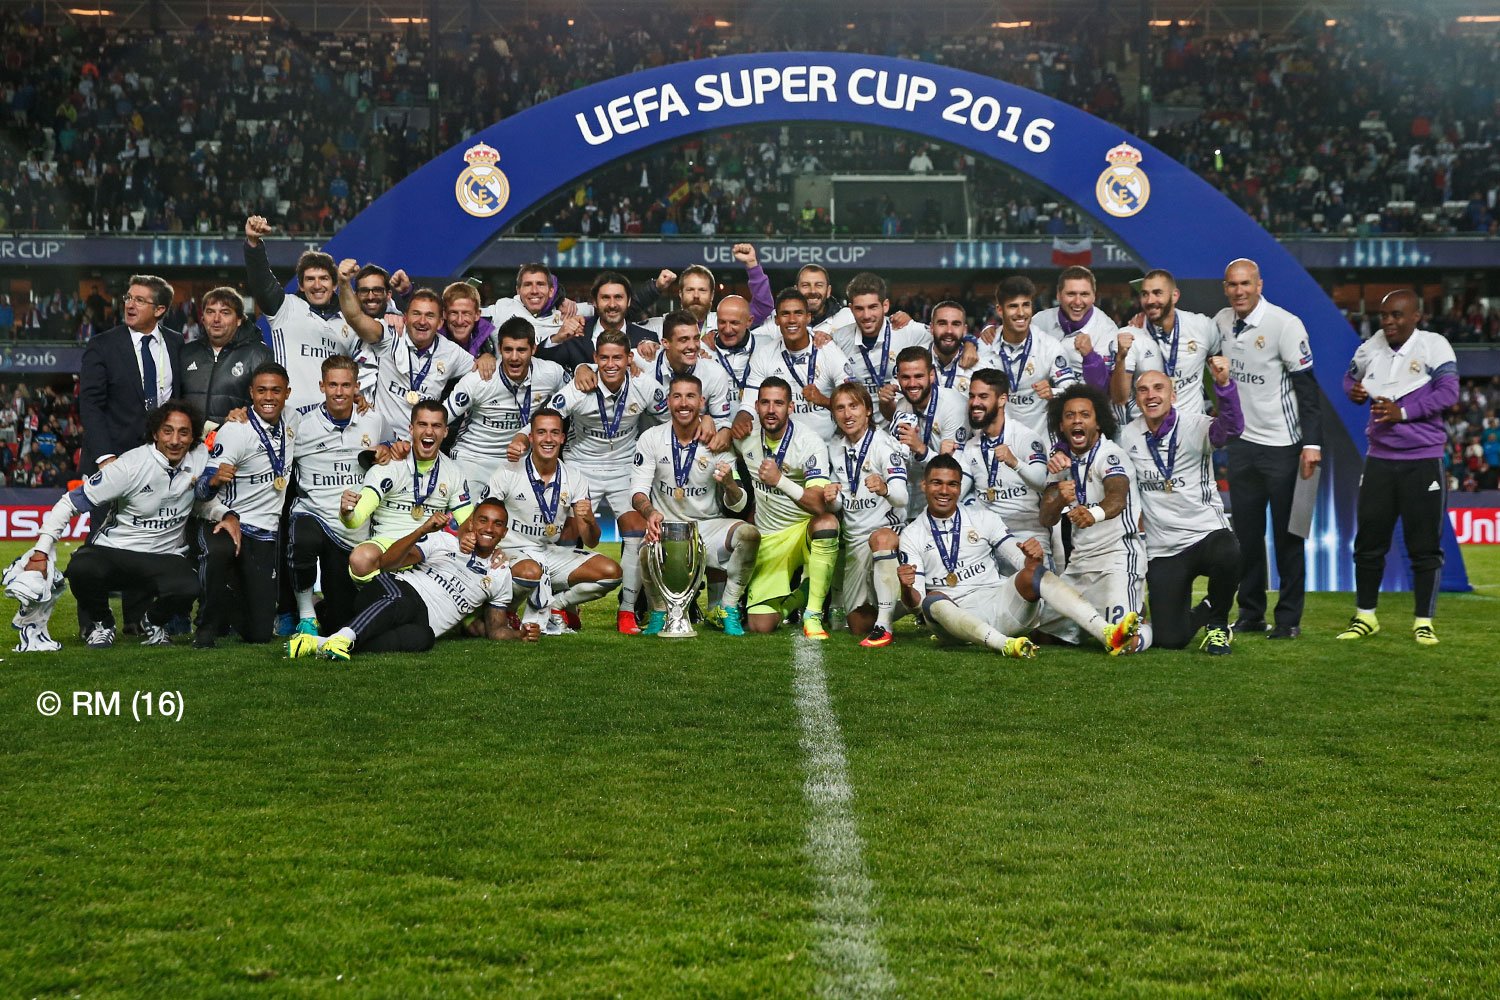 Real Madrid Super Cup 2016